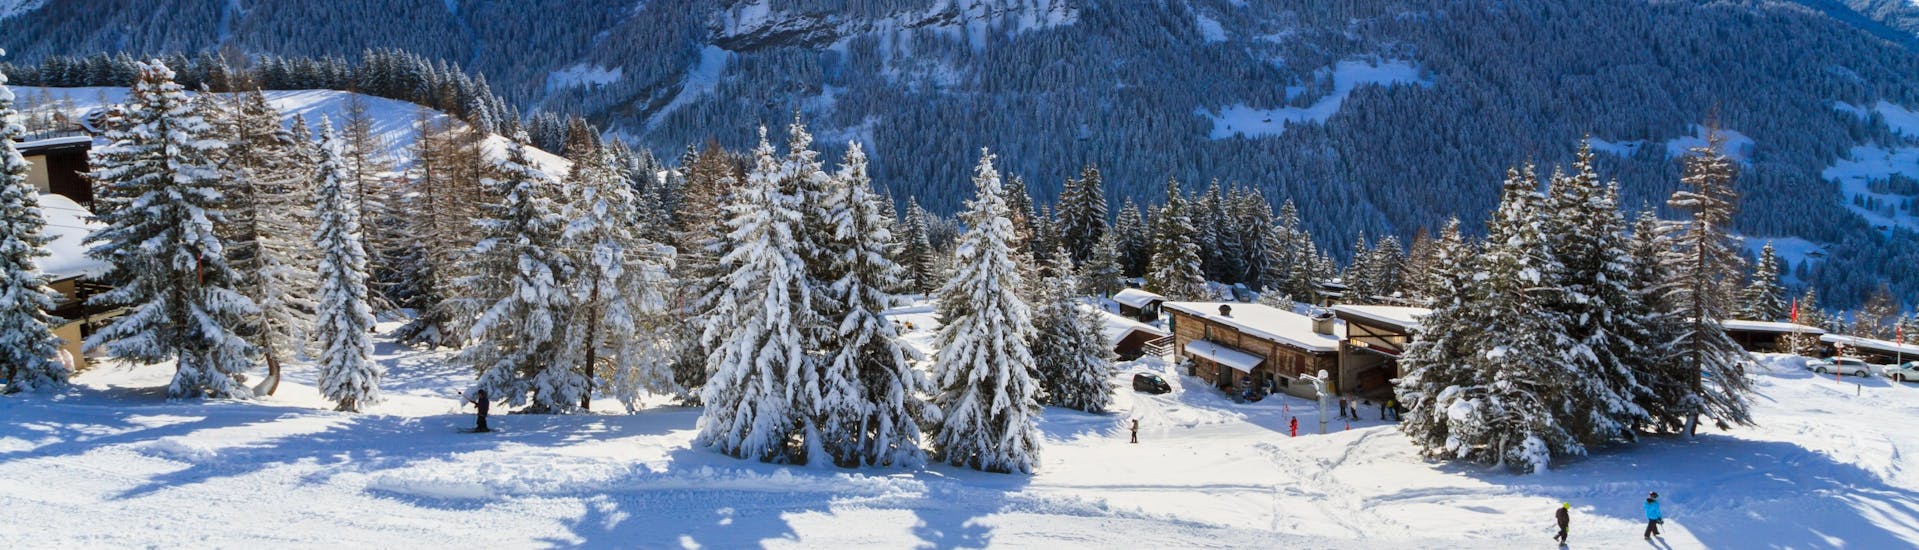 A panoramic view of the ski slopes and the surrounding mountains of Villars, a popular Swiss ski resort where visitors can book ski lessons with one of the local ski schools.